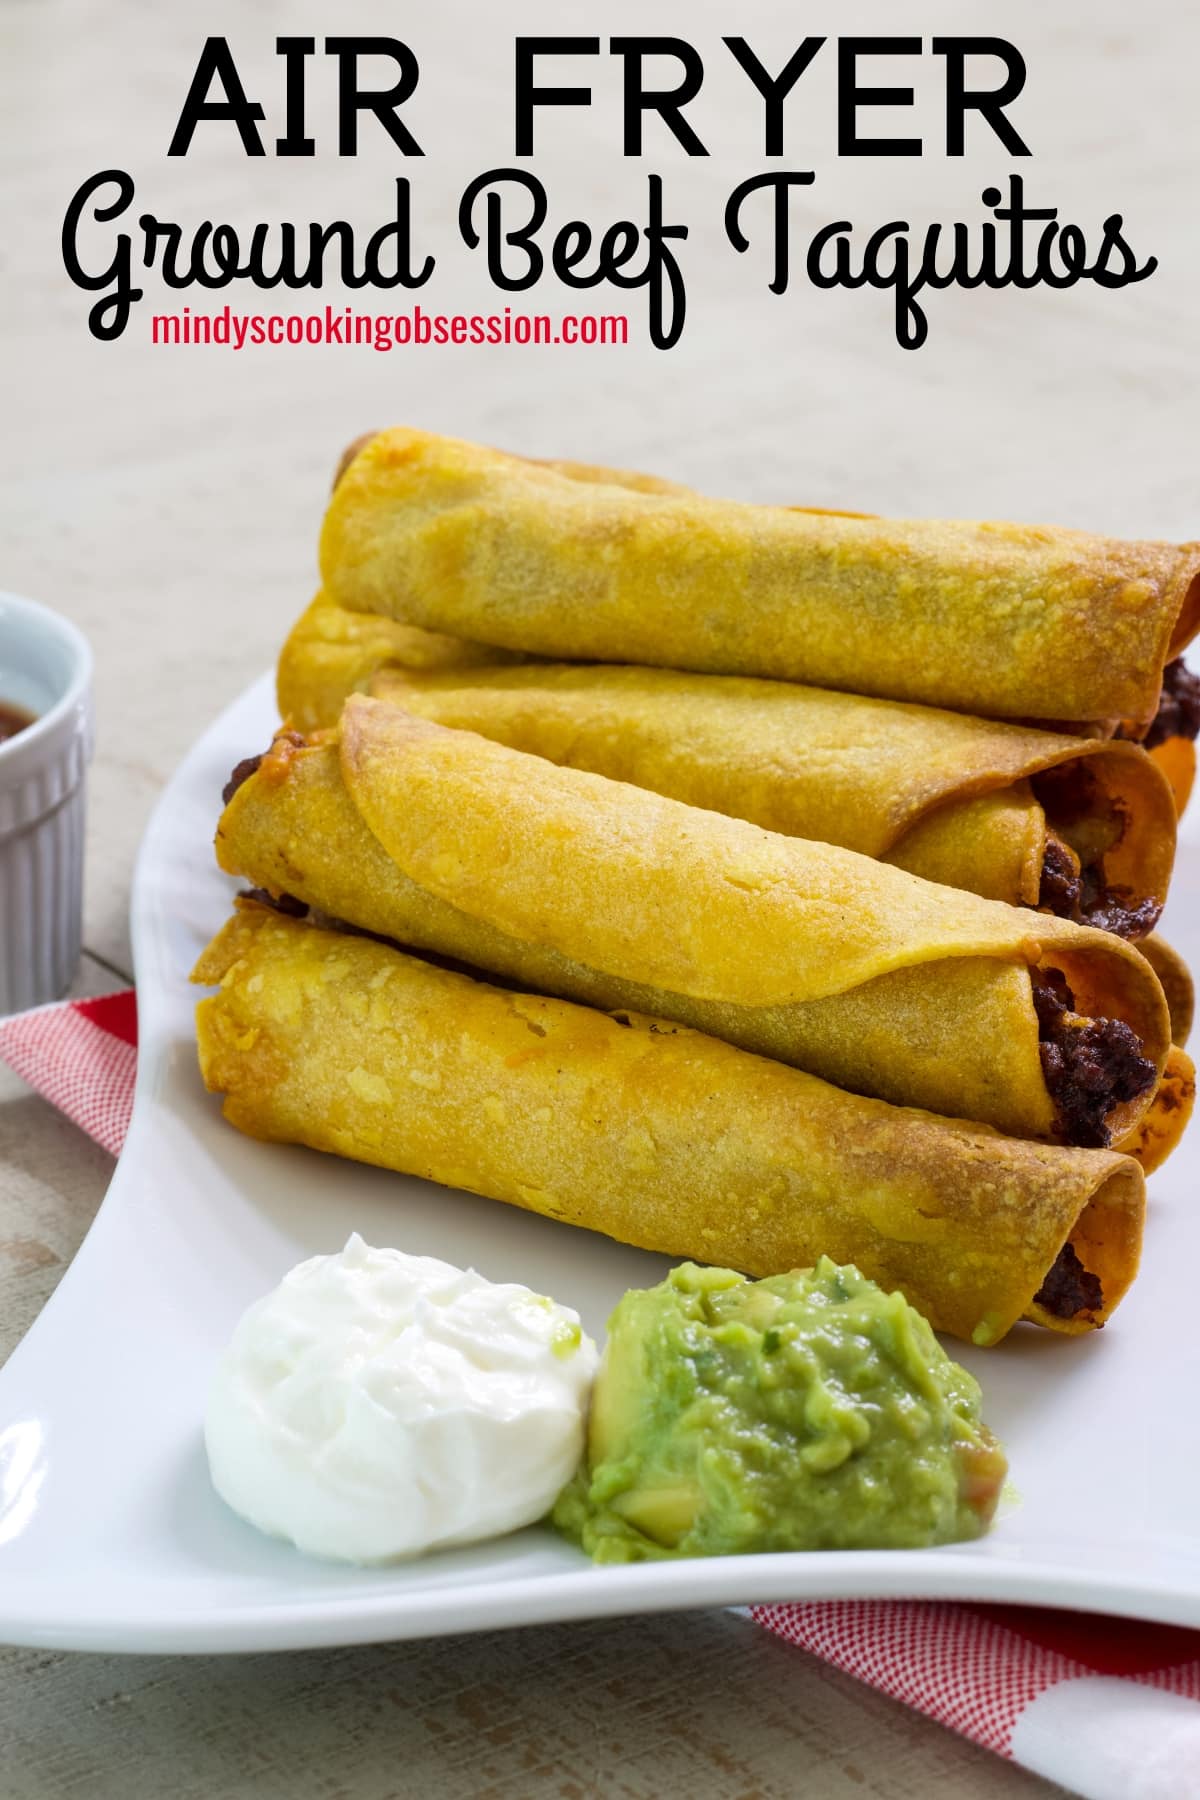 Easy Homemade Air Fryer Ground Beef Taquitos Recipe is quick and perfect for a quick meal or snack for game day or a party.  via @mindyscookingobsession